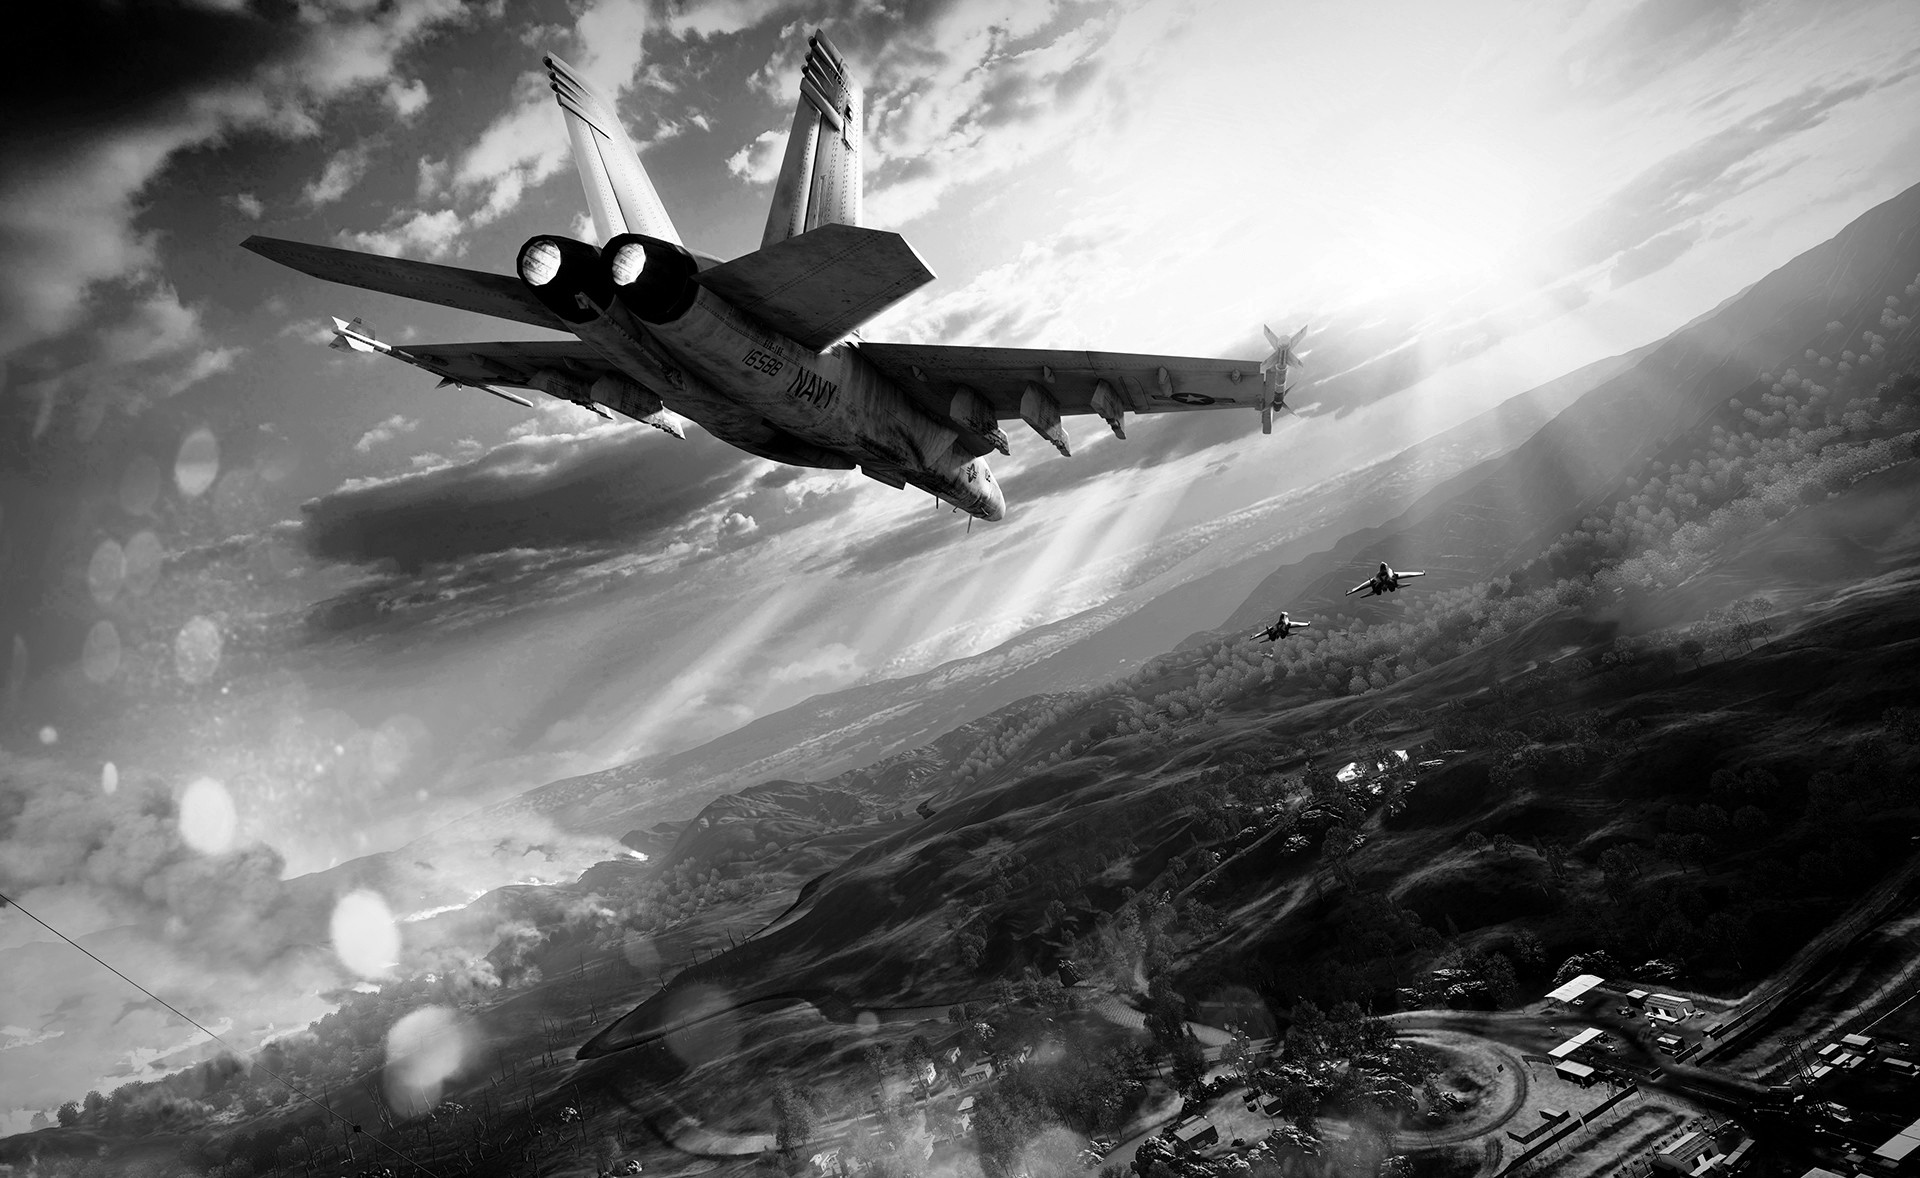 General 1920x1178 airplane military aircraft Battlefield 3 video games aircraft numbers monochrome McDonnell Douglas F/A-18 Hornet United States Navy McDonnell Douglas American aircraft EA DICE Electronic Arts first-person shooter